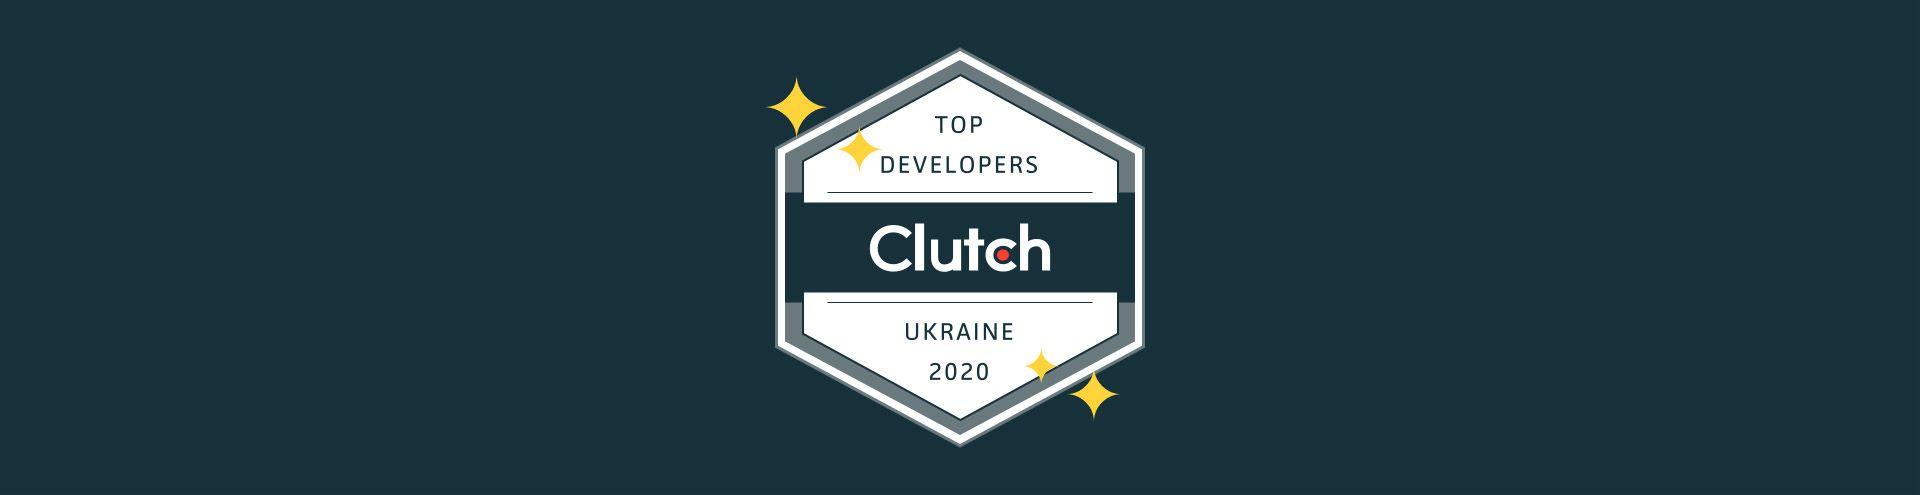 Apiko Named as one of Top Developers in Ukraine by Clutch